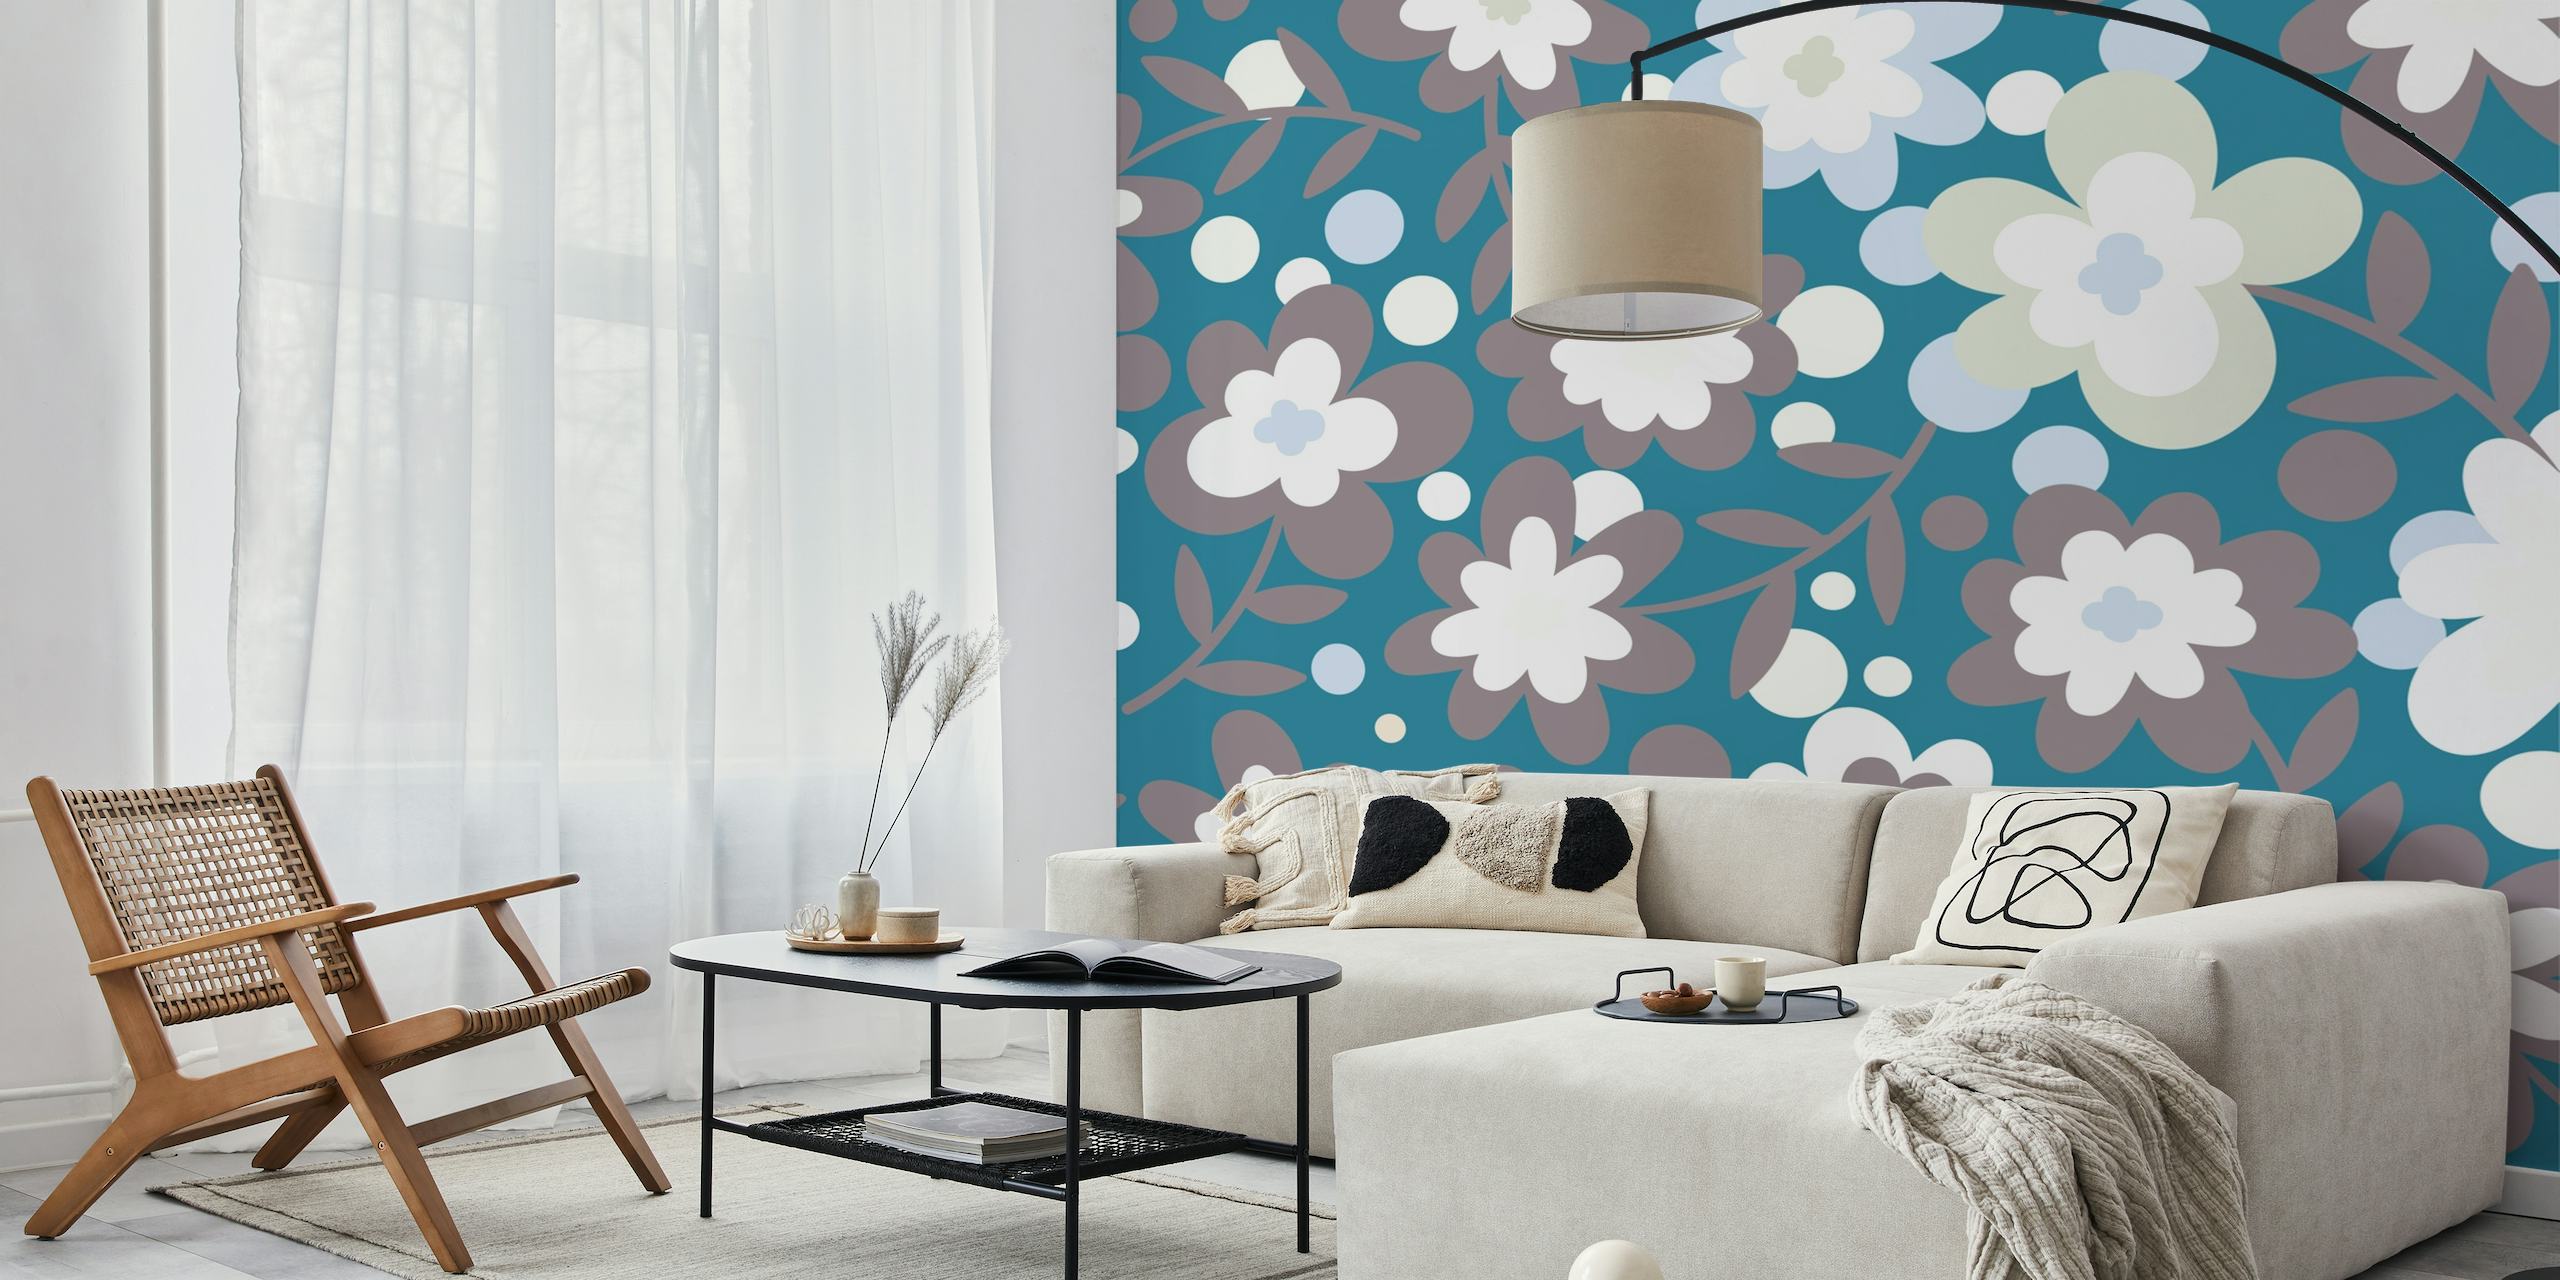 Elegant white, teal, and grey floral pattern wall mural